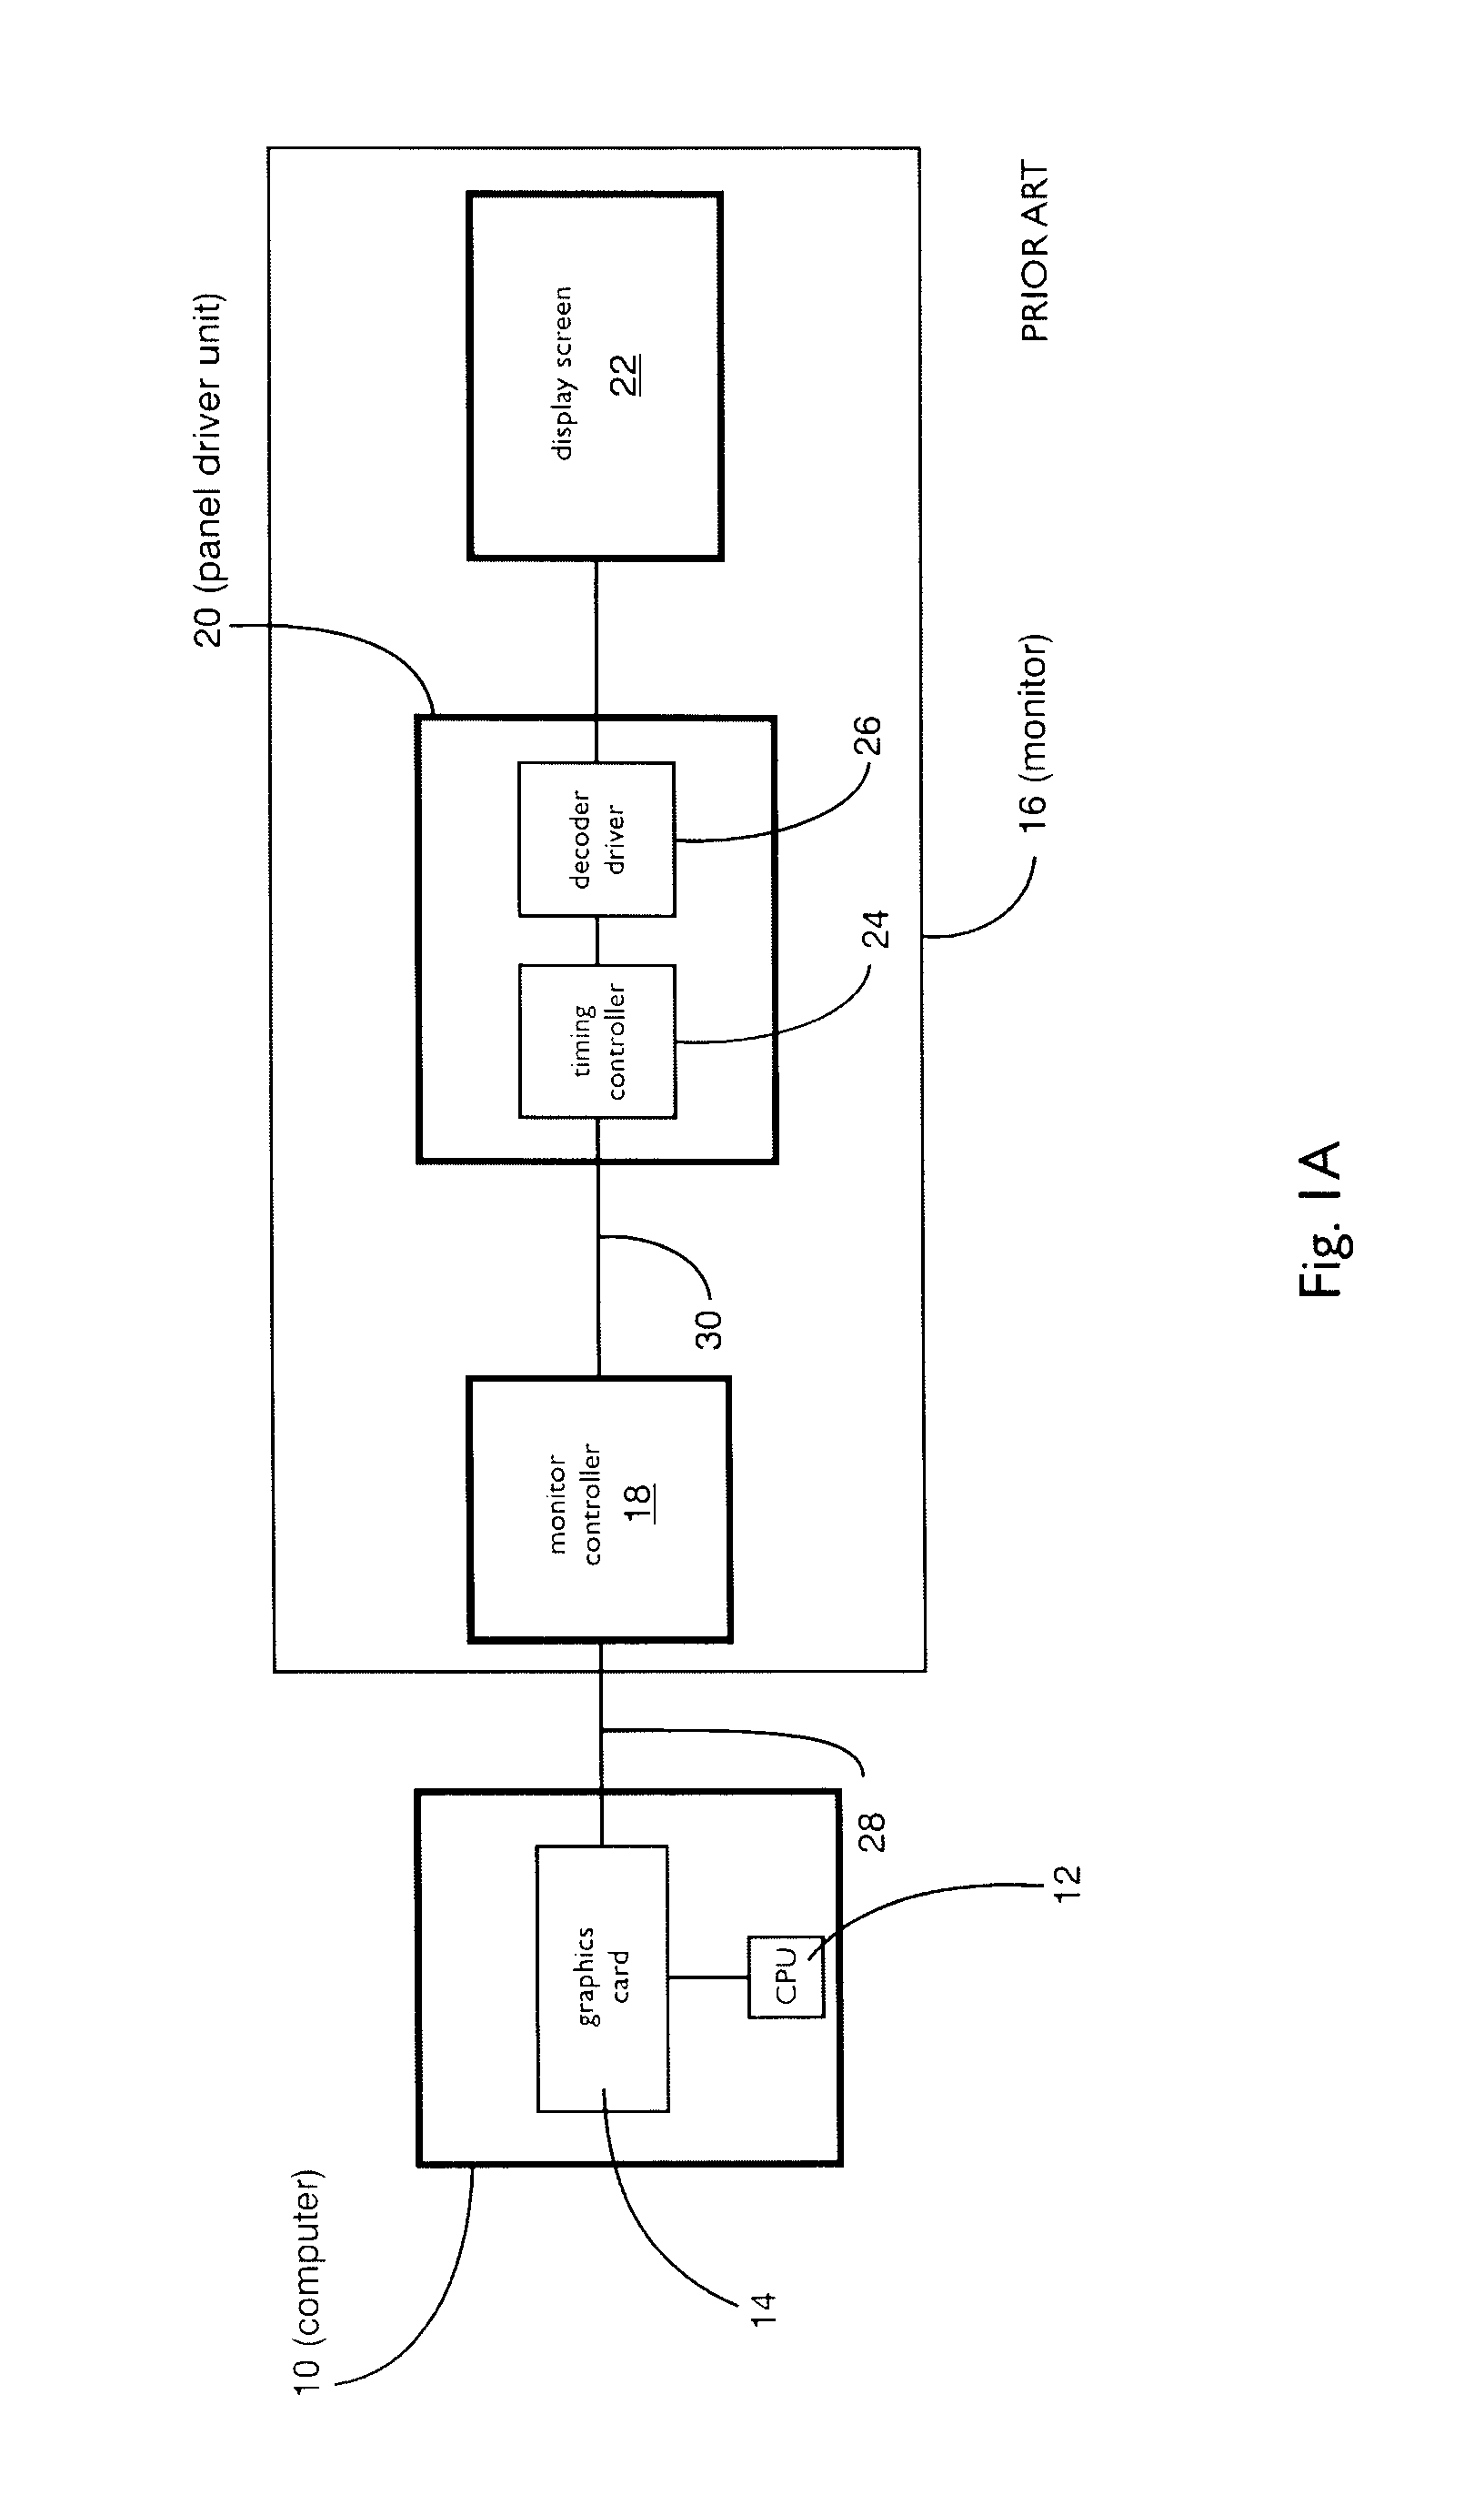 System and Method for Displaying Computer Data in a Multi-Screen Display System